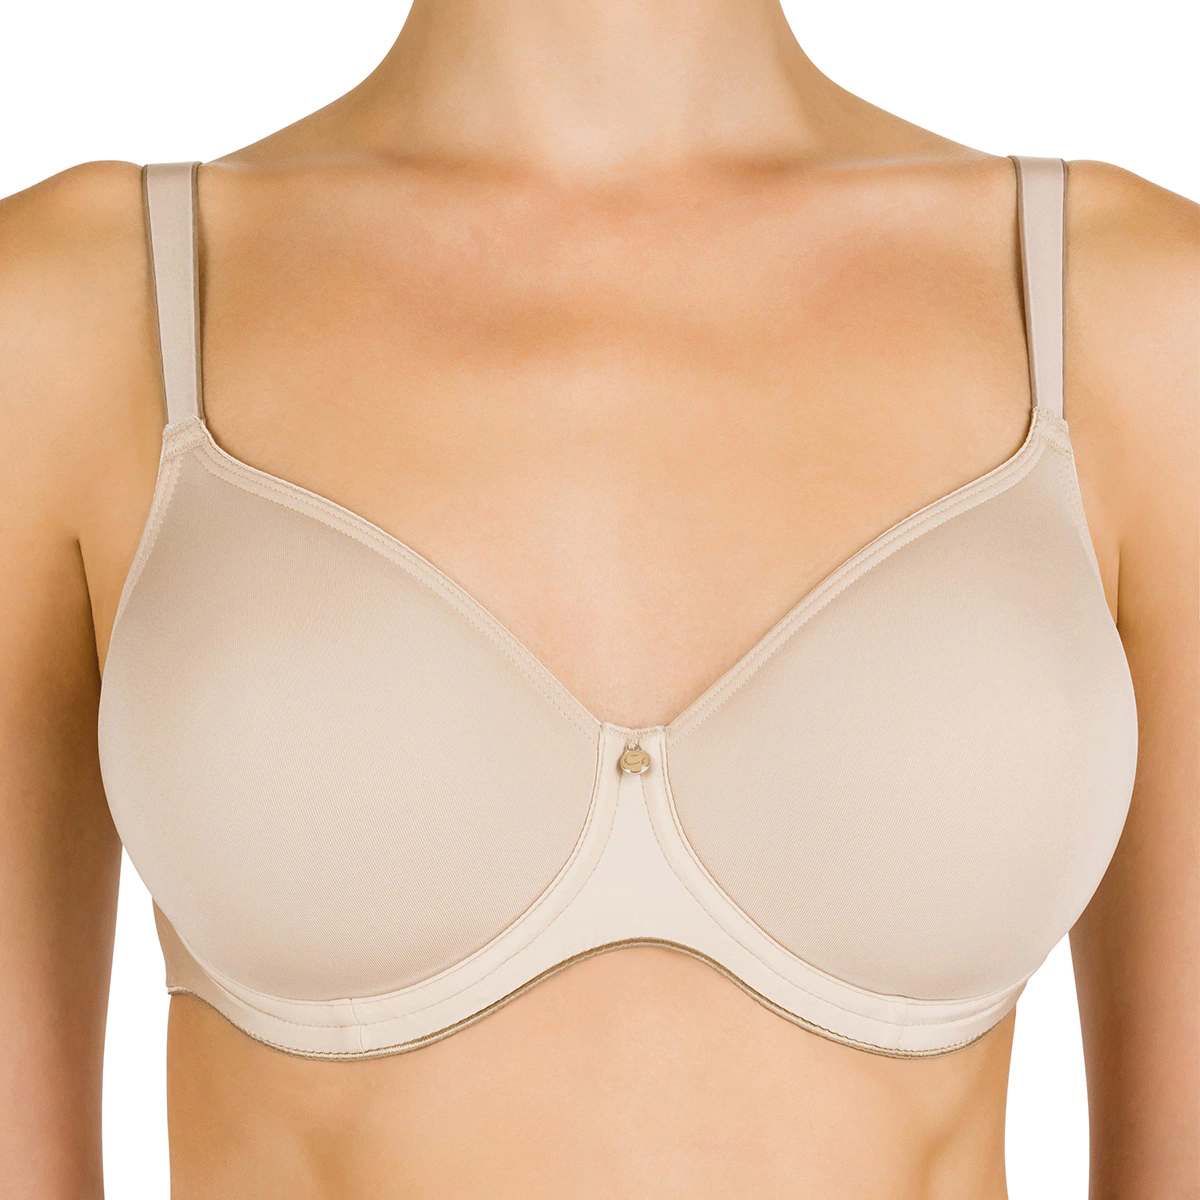 Conturelle Pure Feeling cup bra with spacer cups